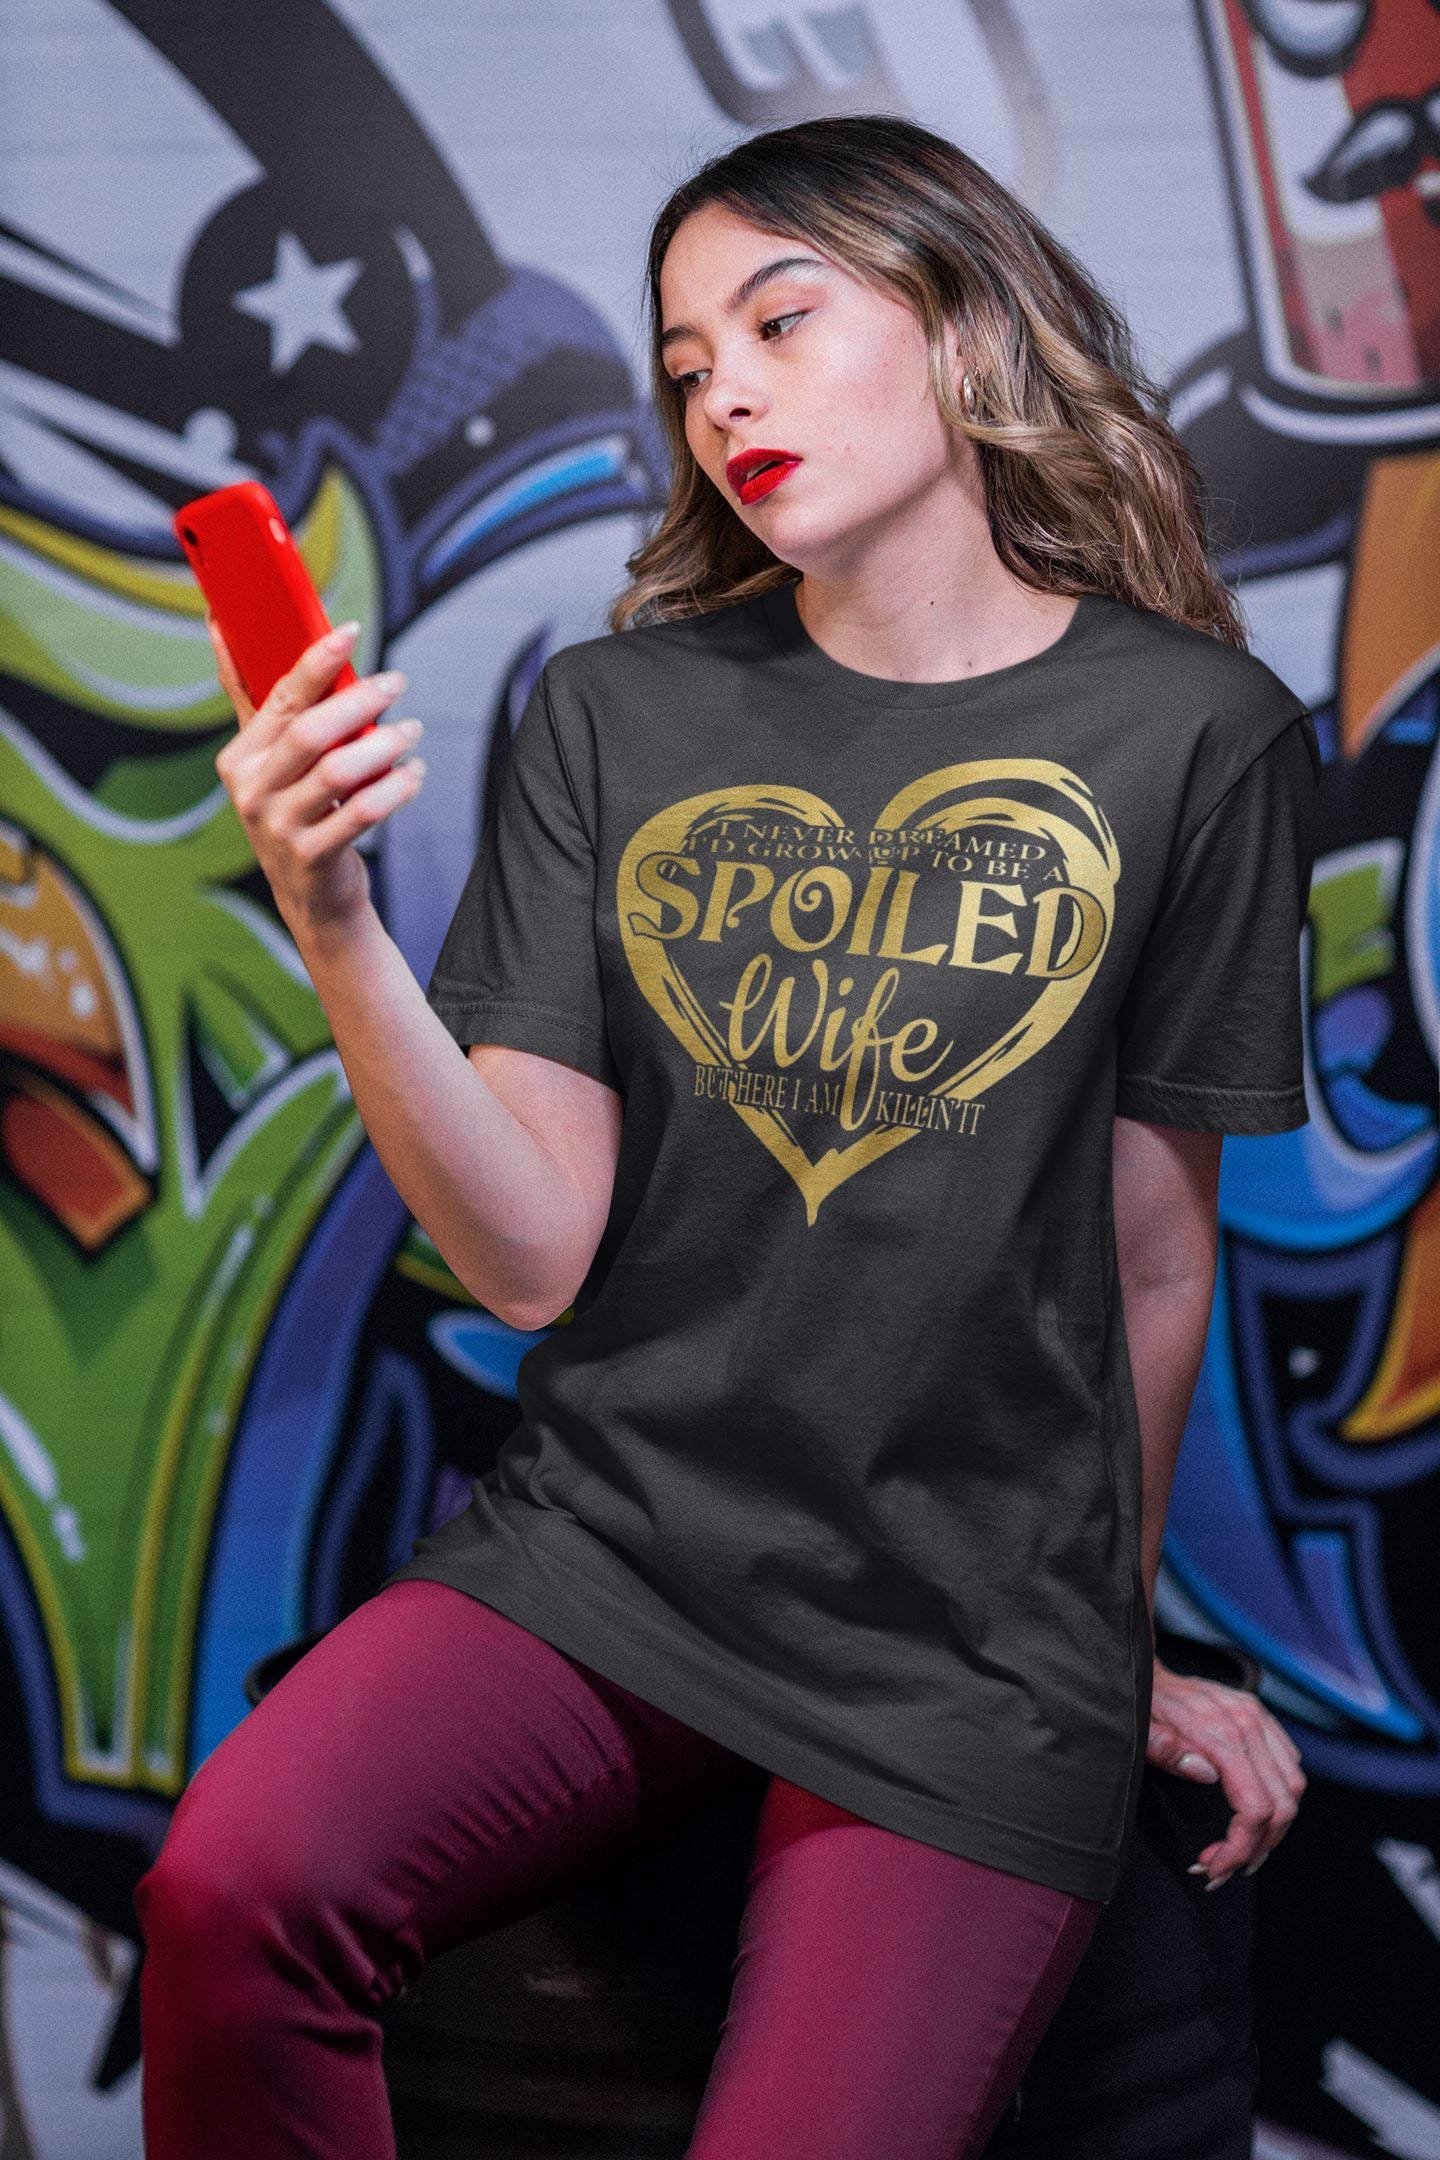 I Never Dreamt of Being a Spoiled Wife Special Black T Shirt for Women freeshipping - Catch My Drift India